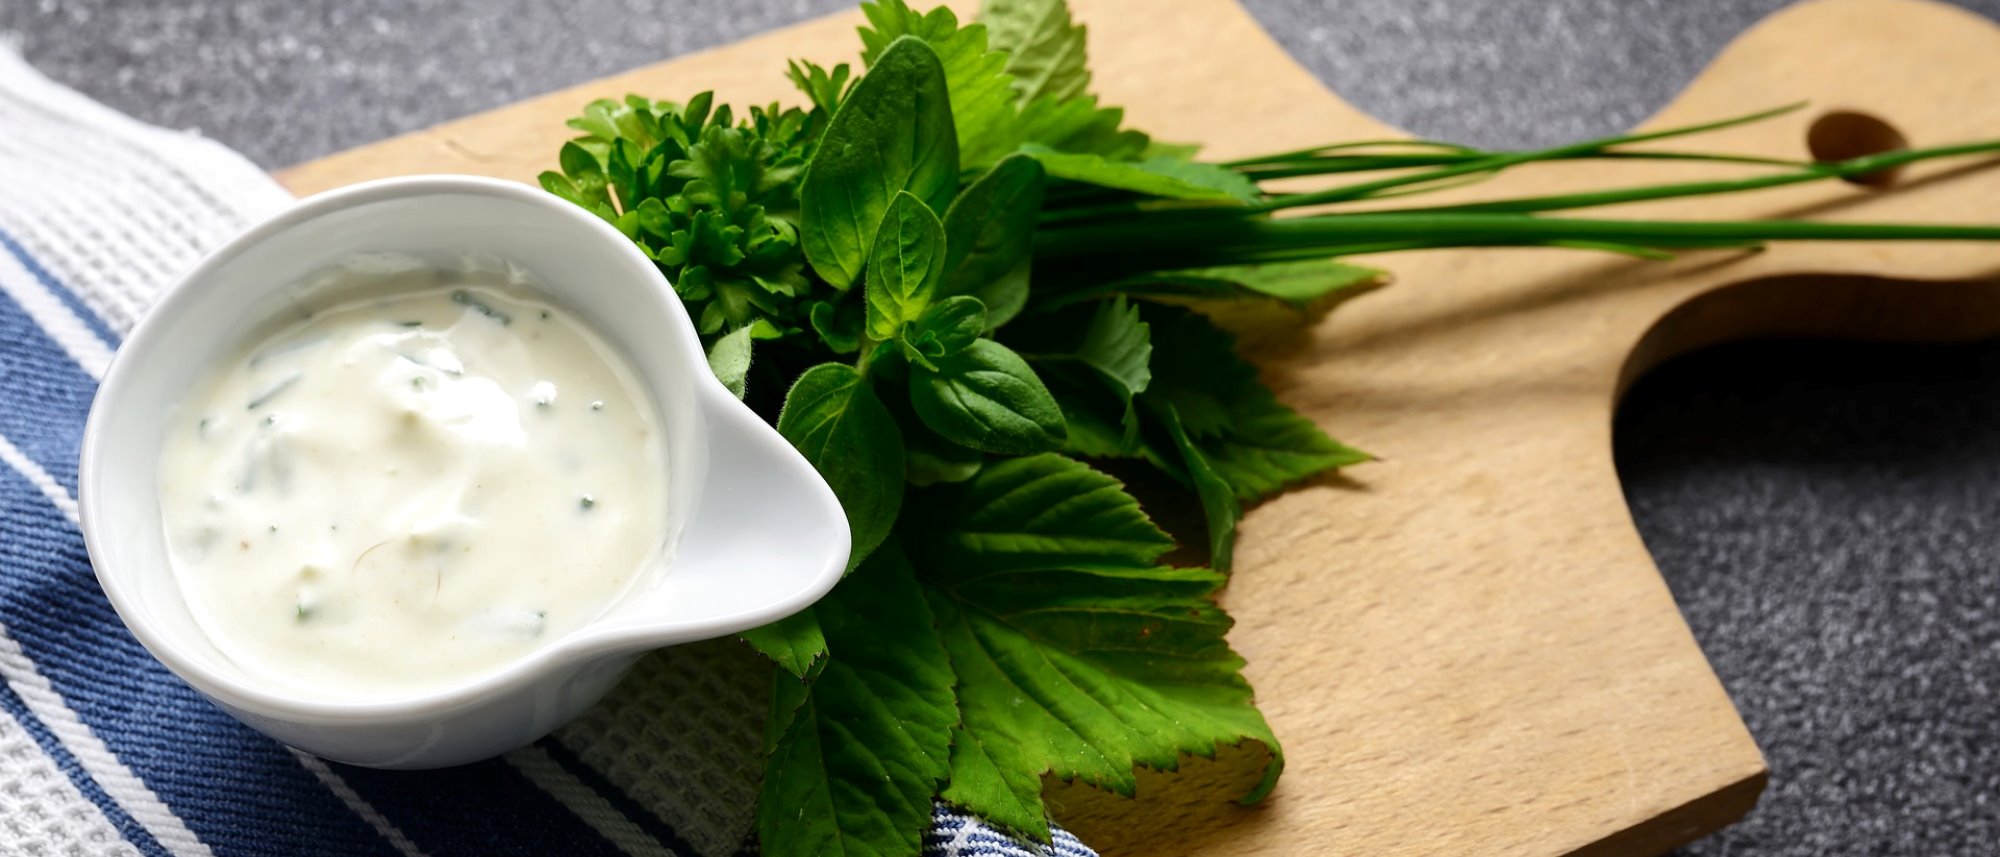 Home made salad dressing with fresh herbs